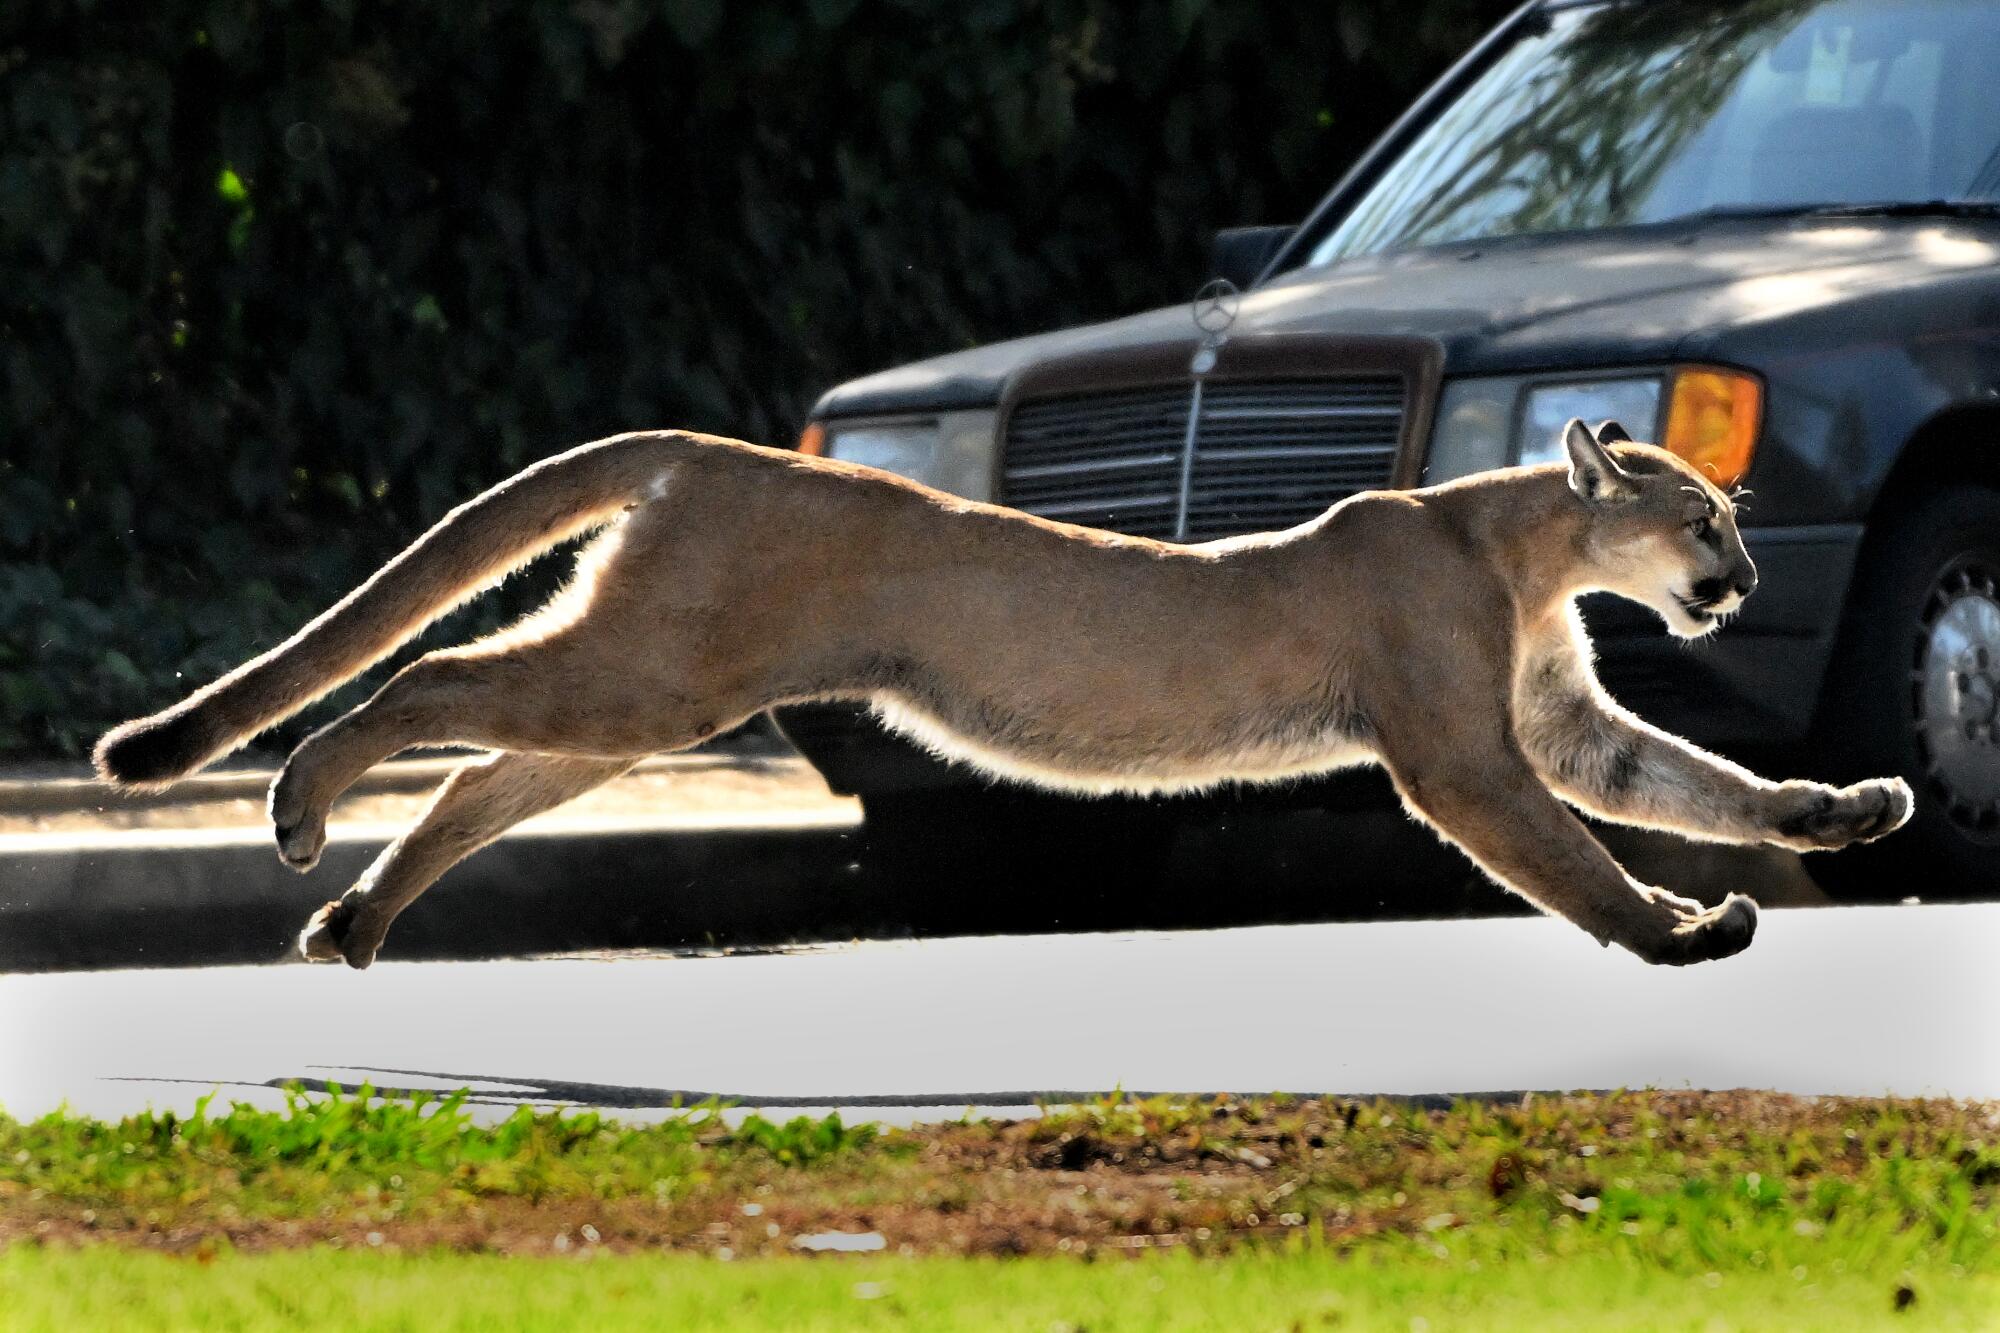 A mountain lion leaps across a street in front of a parked car.